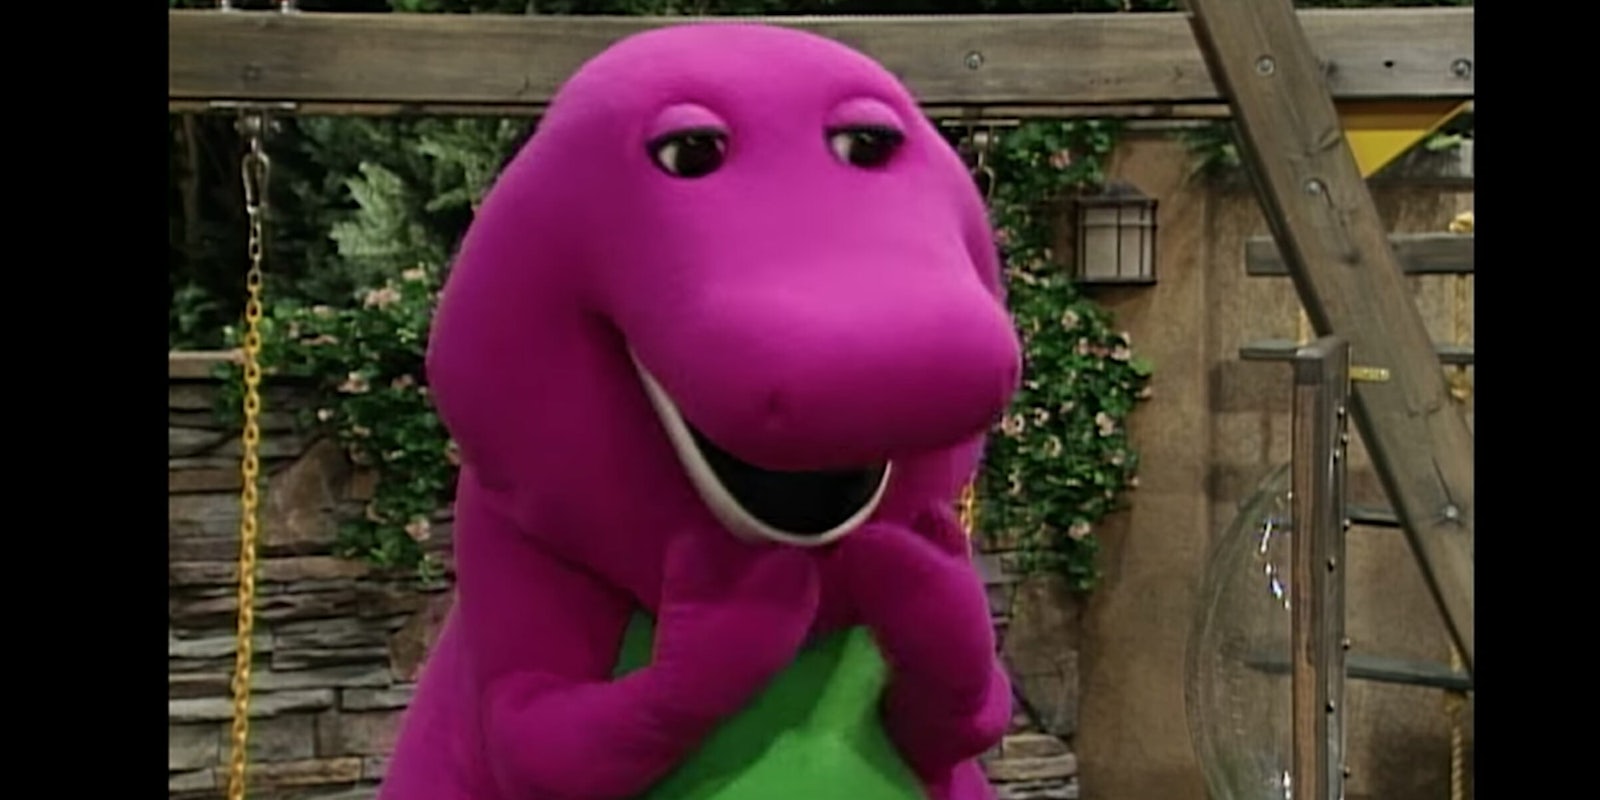 David Joyner, an actor who once played Barney the purple dinosaur, now runs a tantric sex business in California.